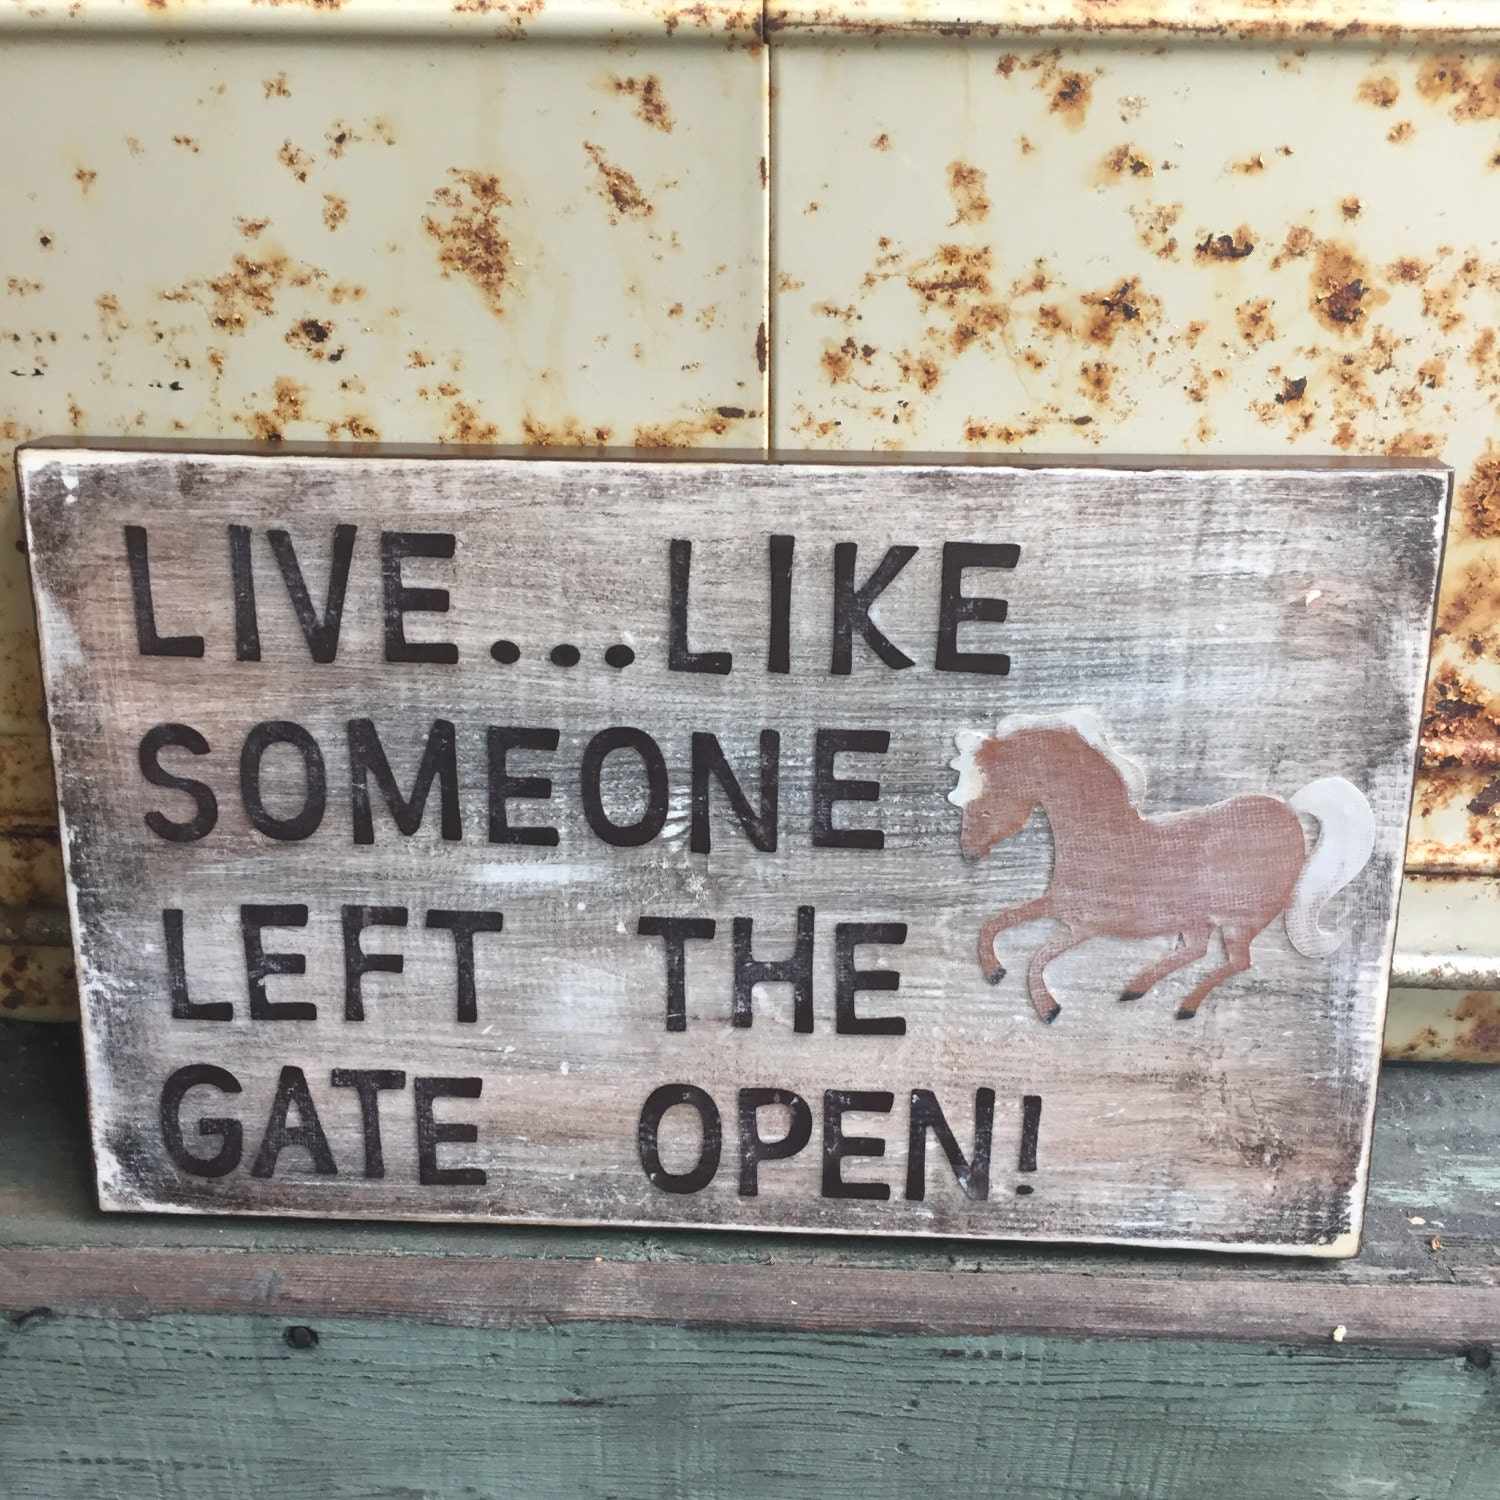 Live Like Someone Left The Gate Open Decorative Wooden Box Sign 4x5 from Primitives by Kathy